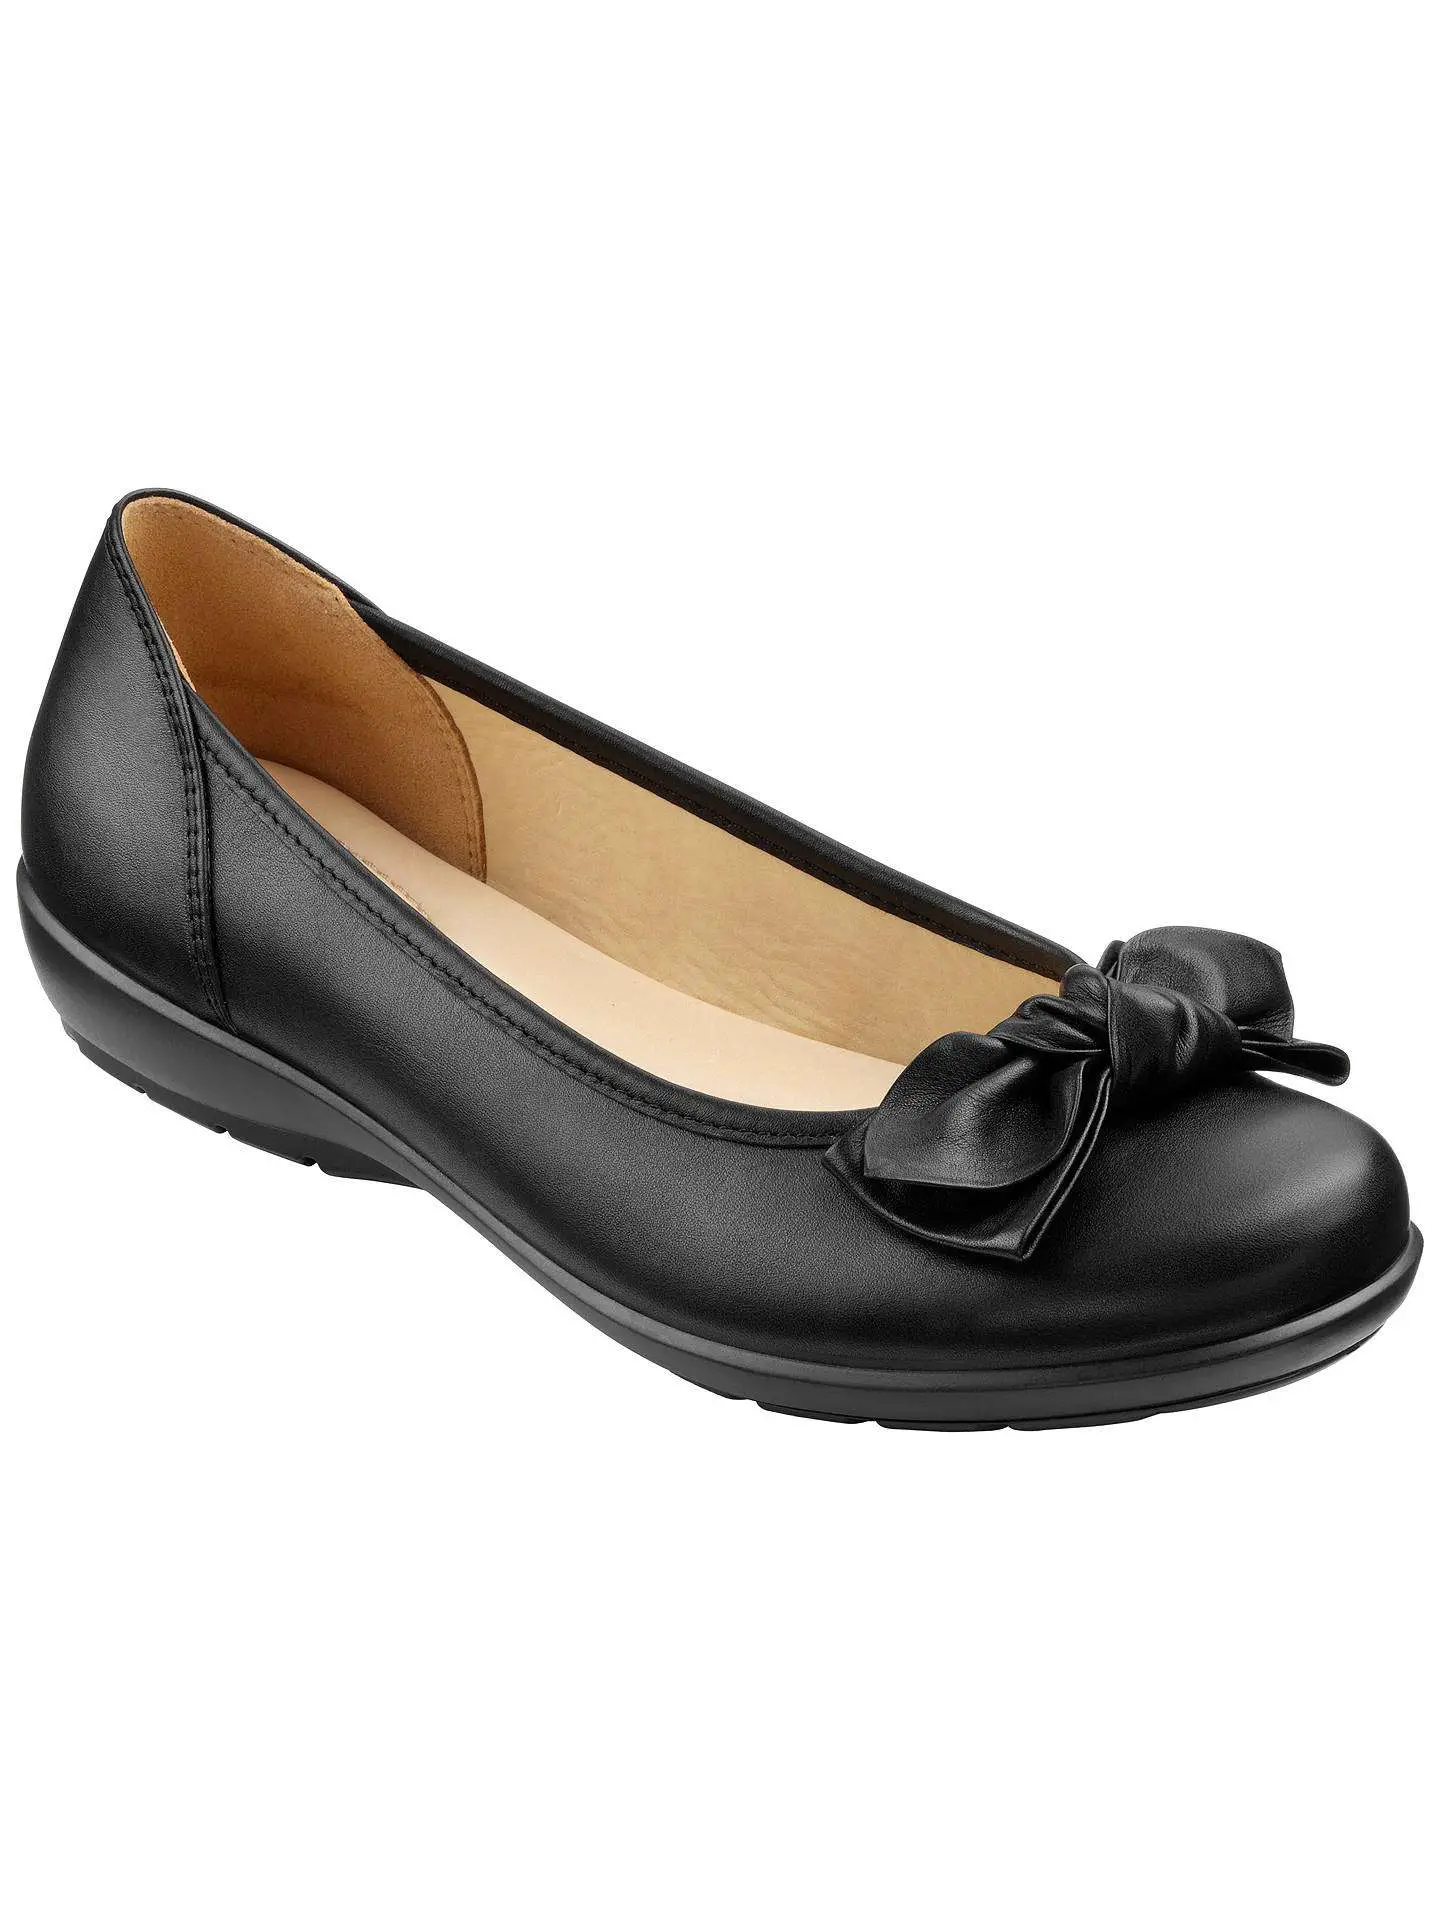 Hotter Made in England Jewel Leather Ballet Pumps, Black ...